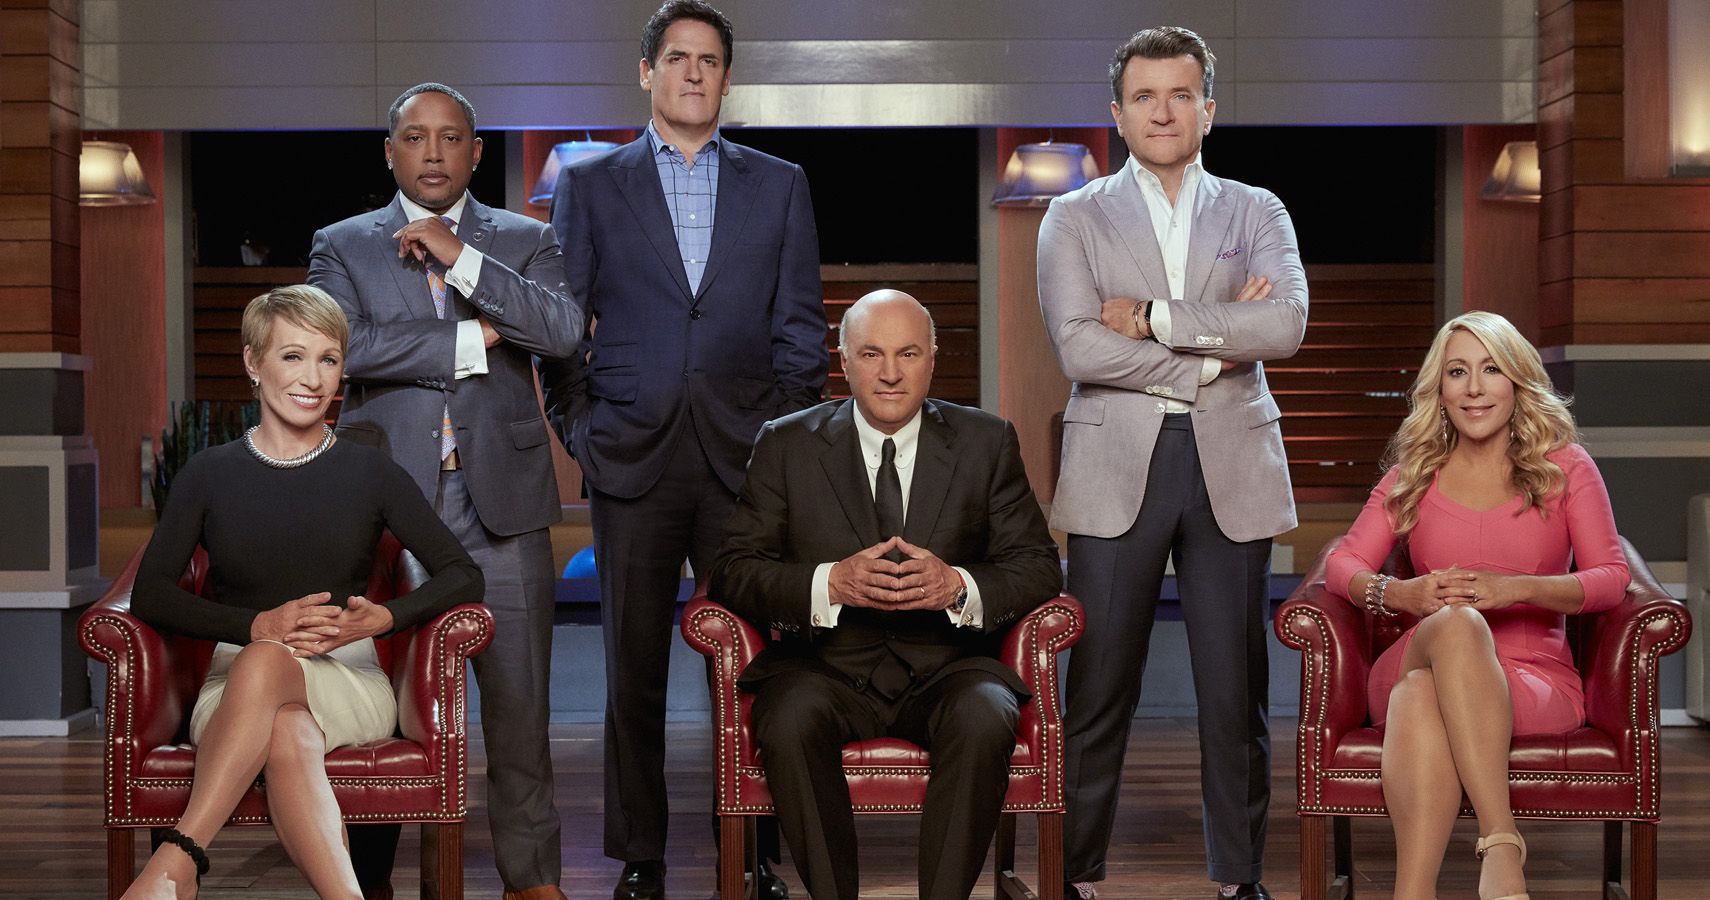 Shark Tank The 15 Worst Pitches The Sharks Passed On (And The 10 Best